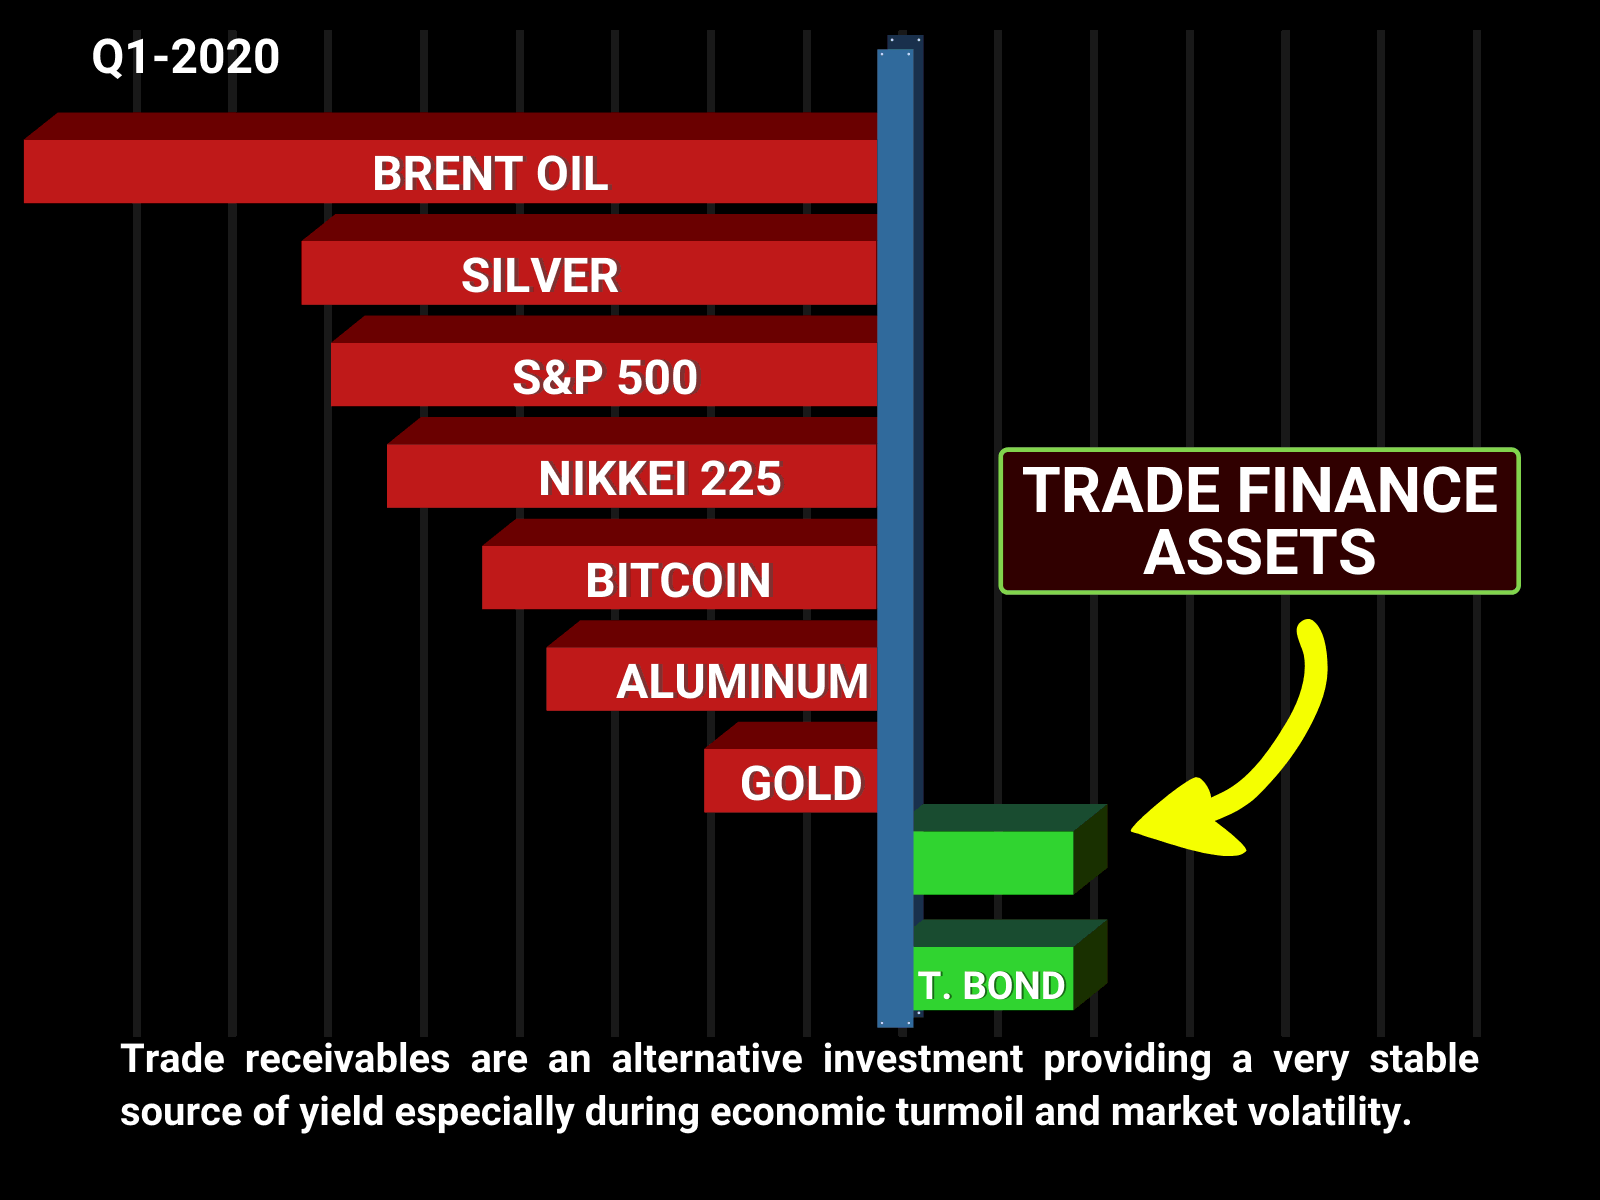 Trade finance assets perform well compared to traditional assets during economic turmoil.